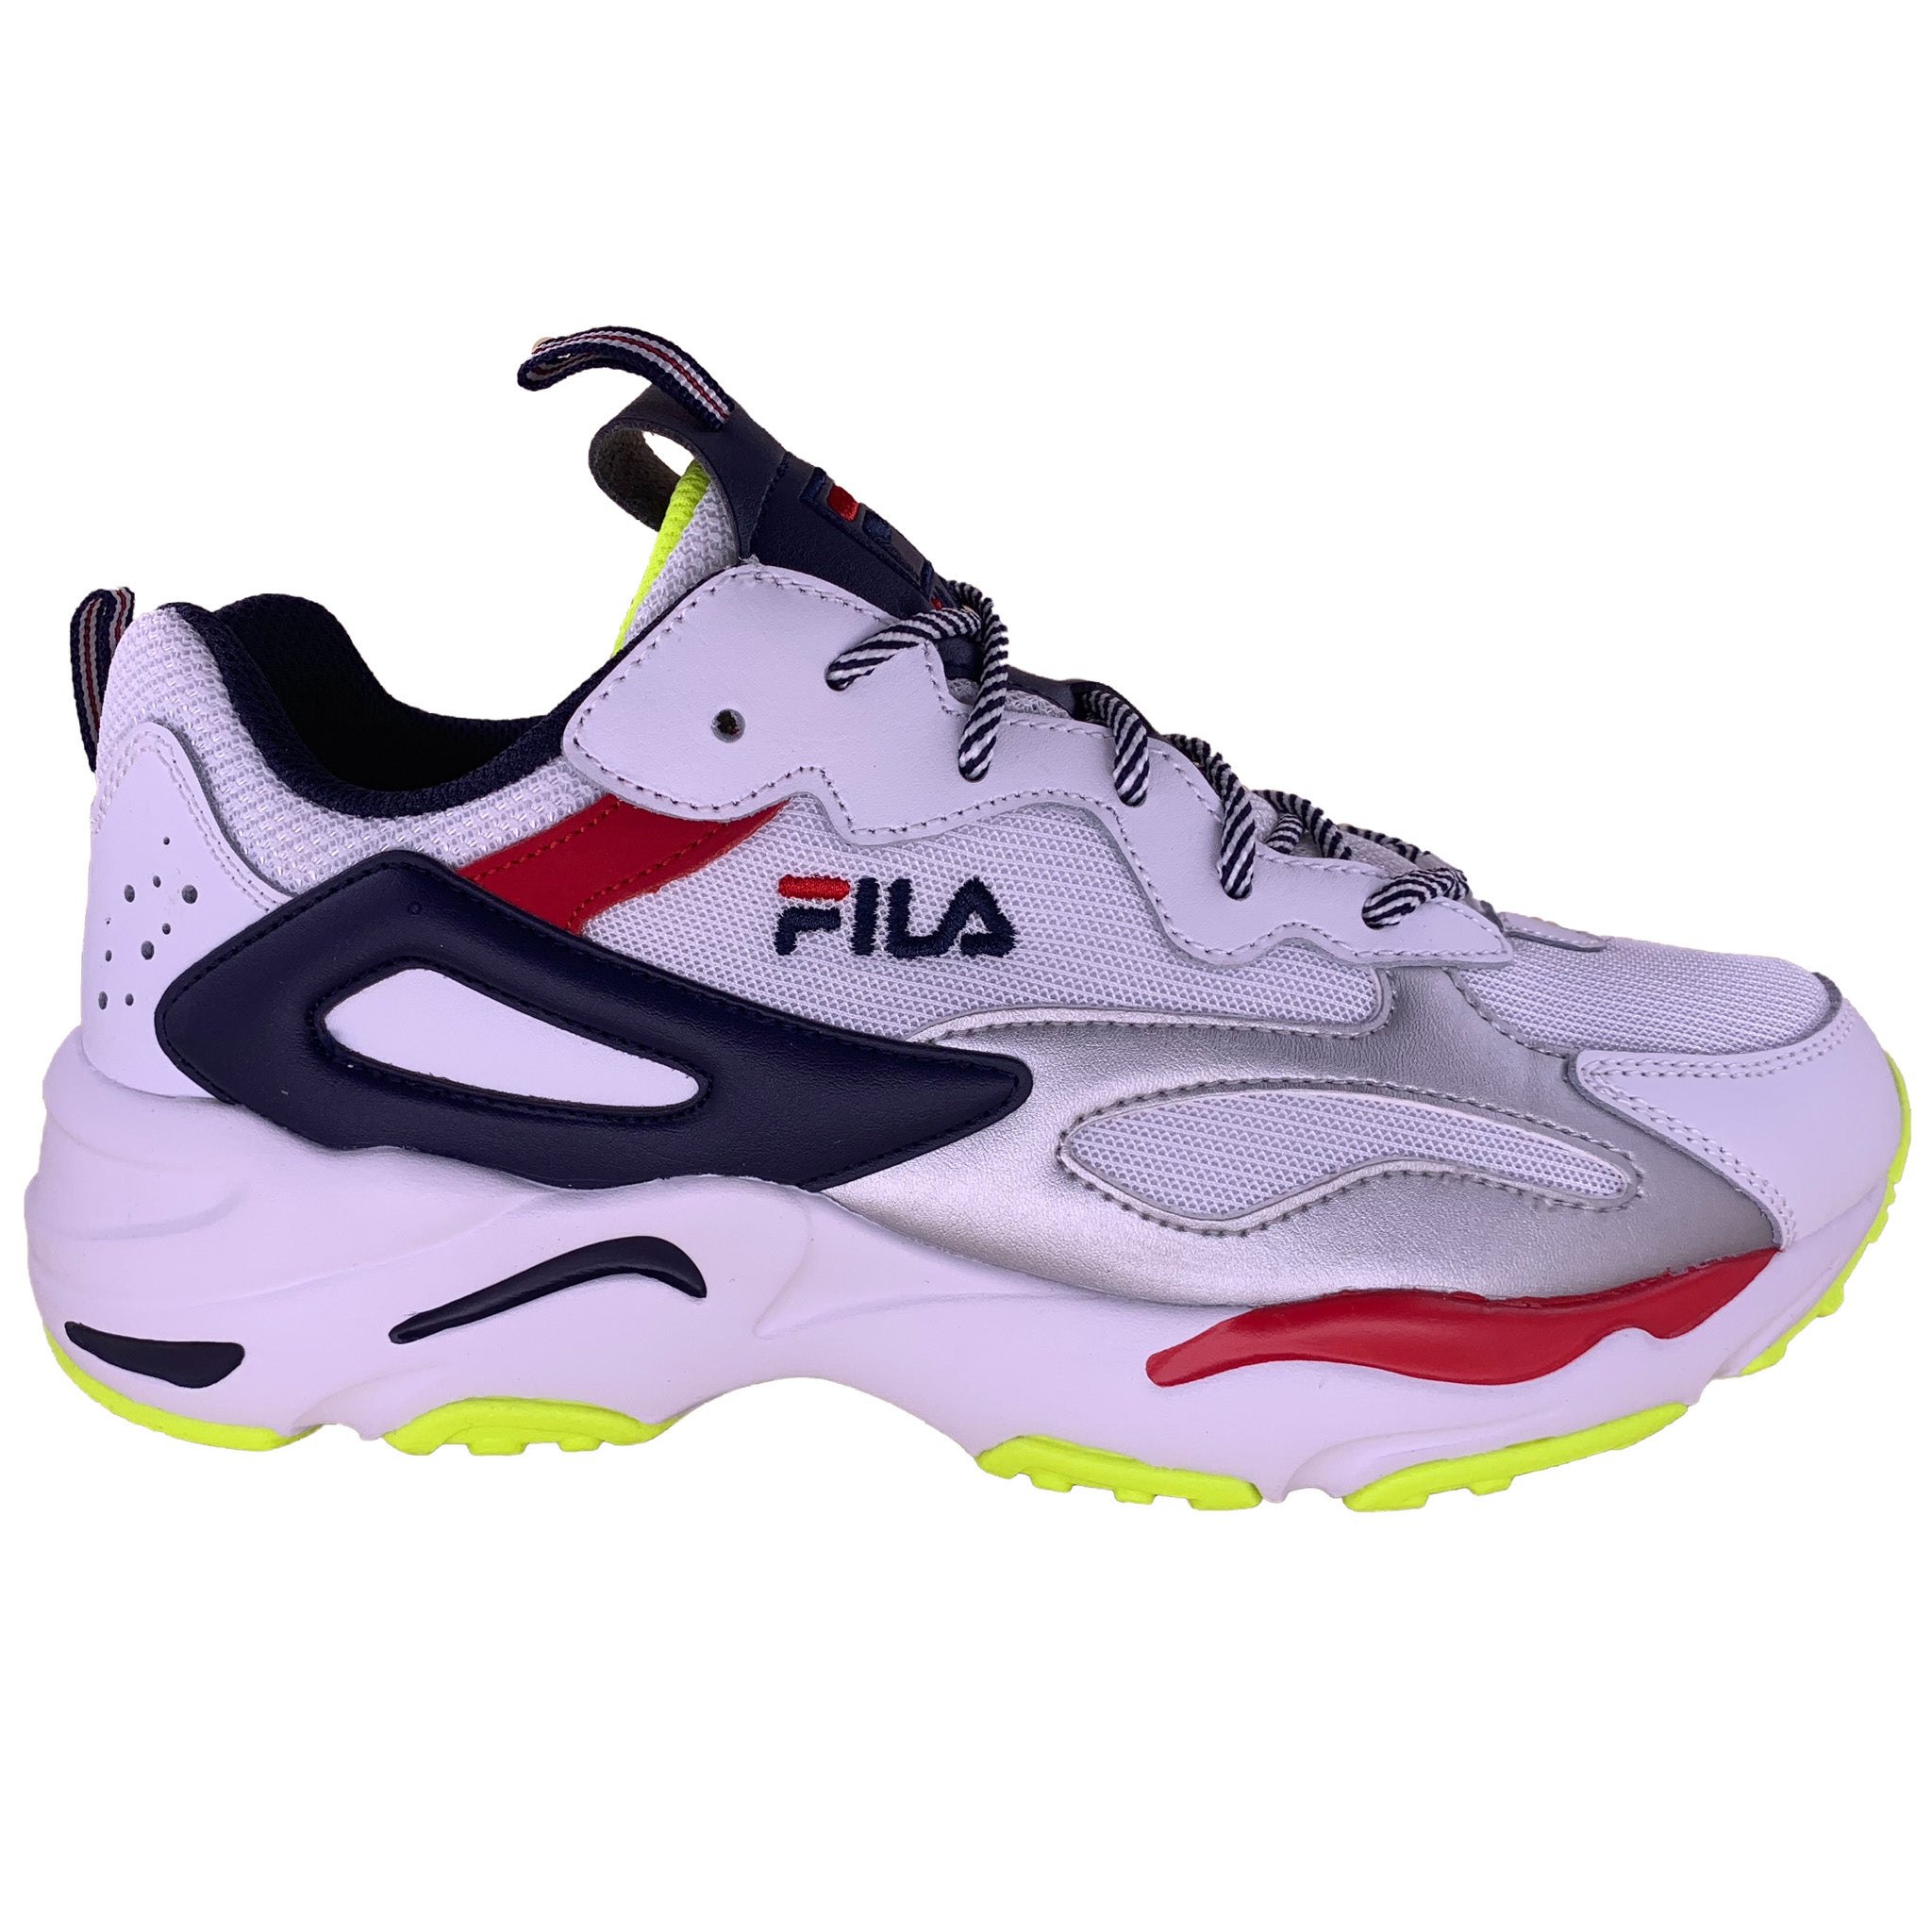 Fila Men's Tracer White Navy Red Neon Shoes – That Shoe Store and More